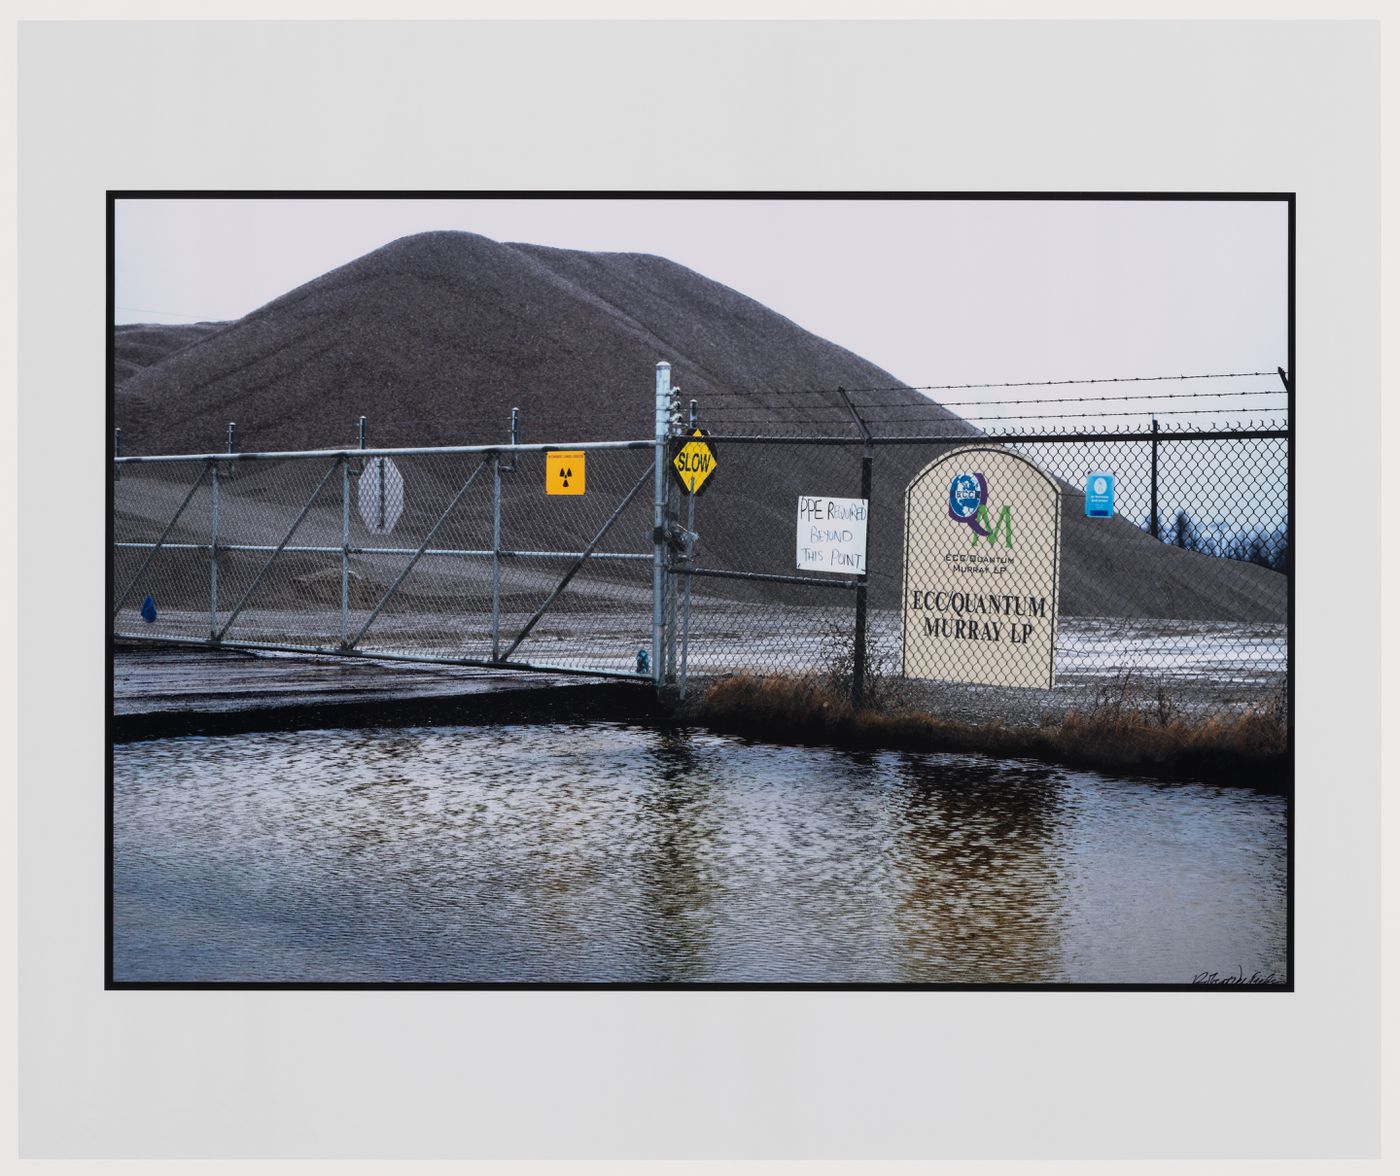 Waste Management Facility under construction, Welcome Township, Port Hope, Ontario